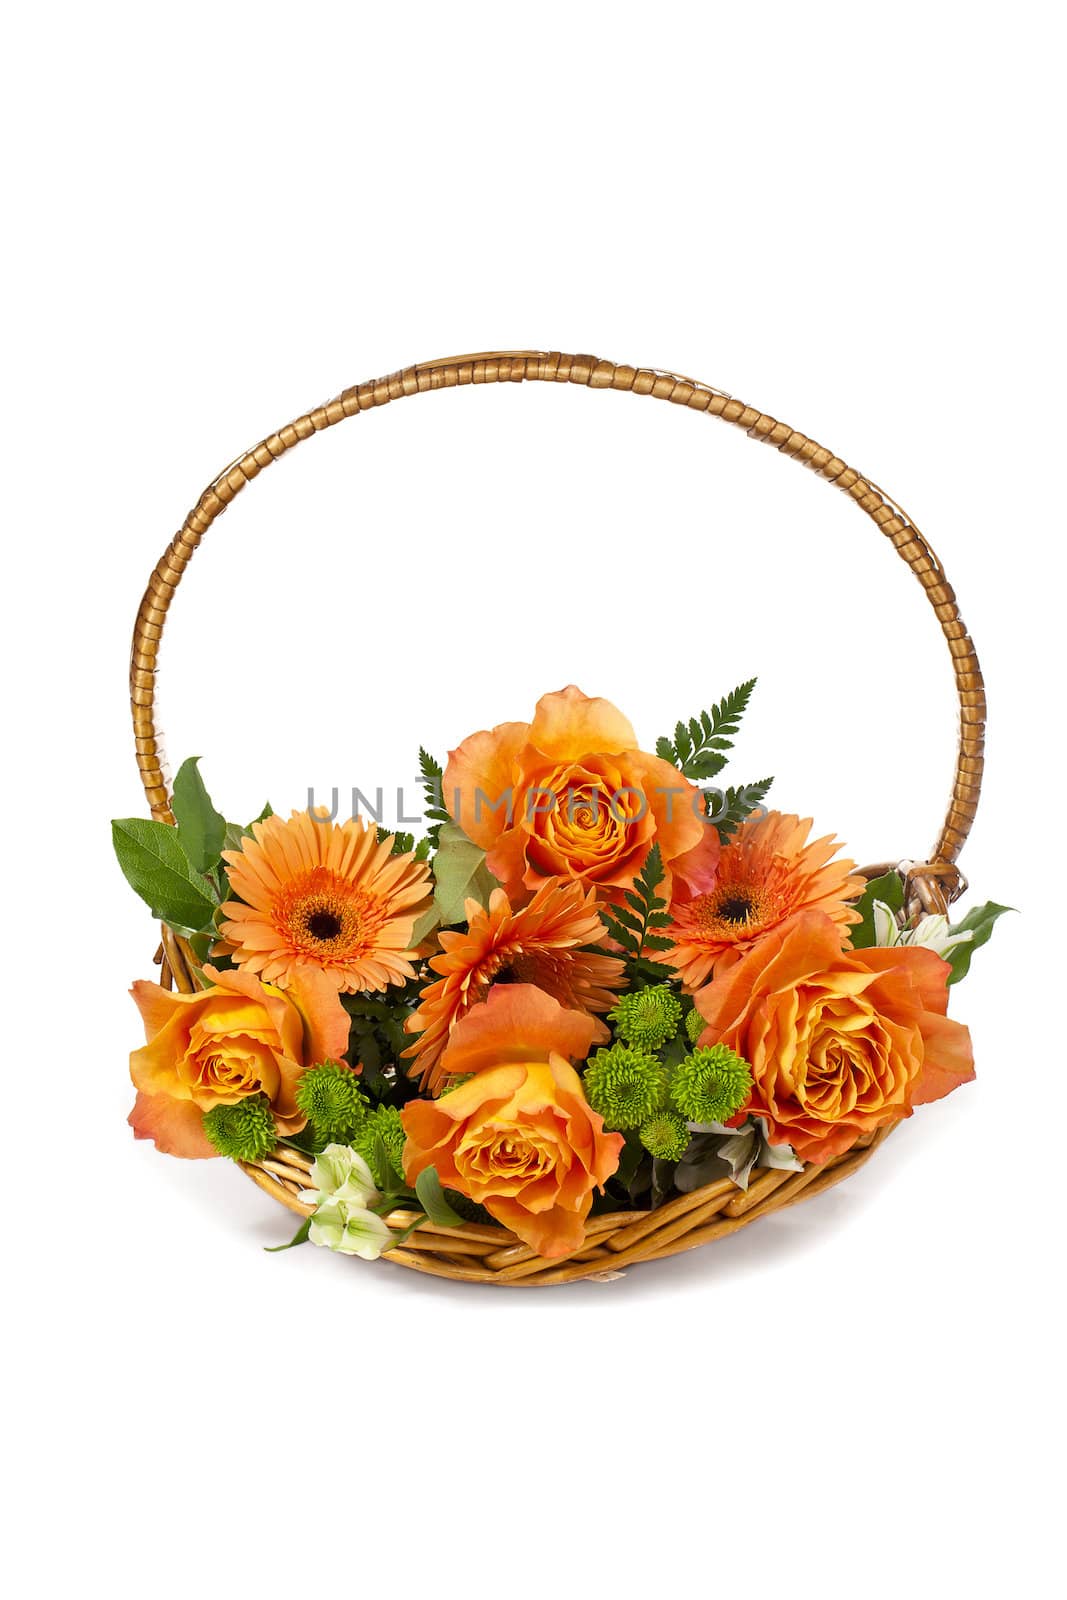 Close-up image of orange daisies and roses in wicker basket.